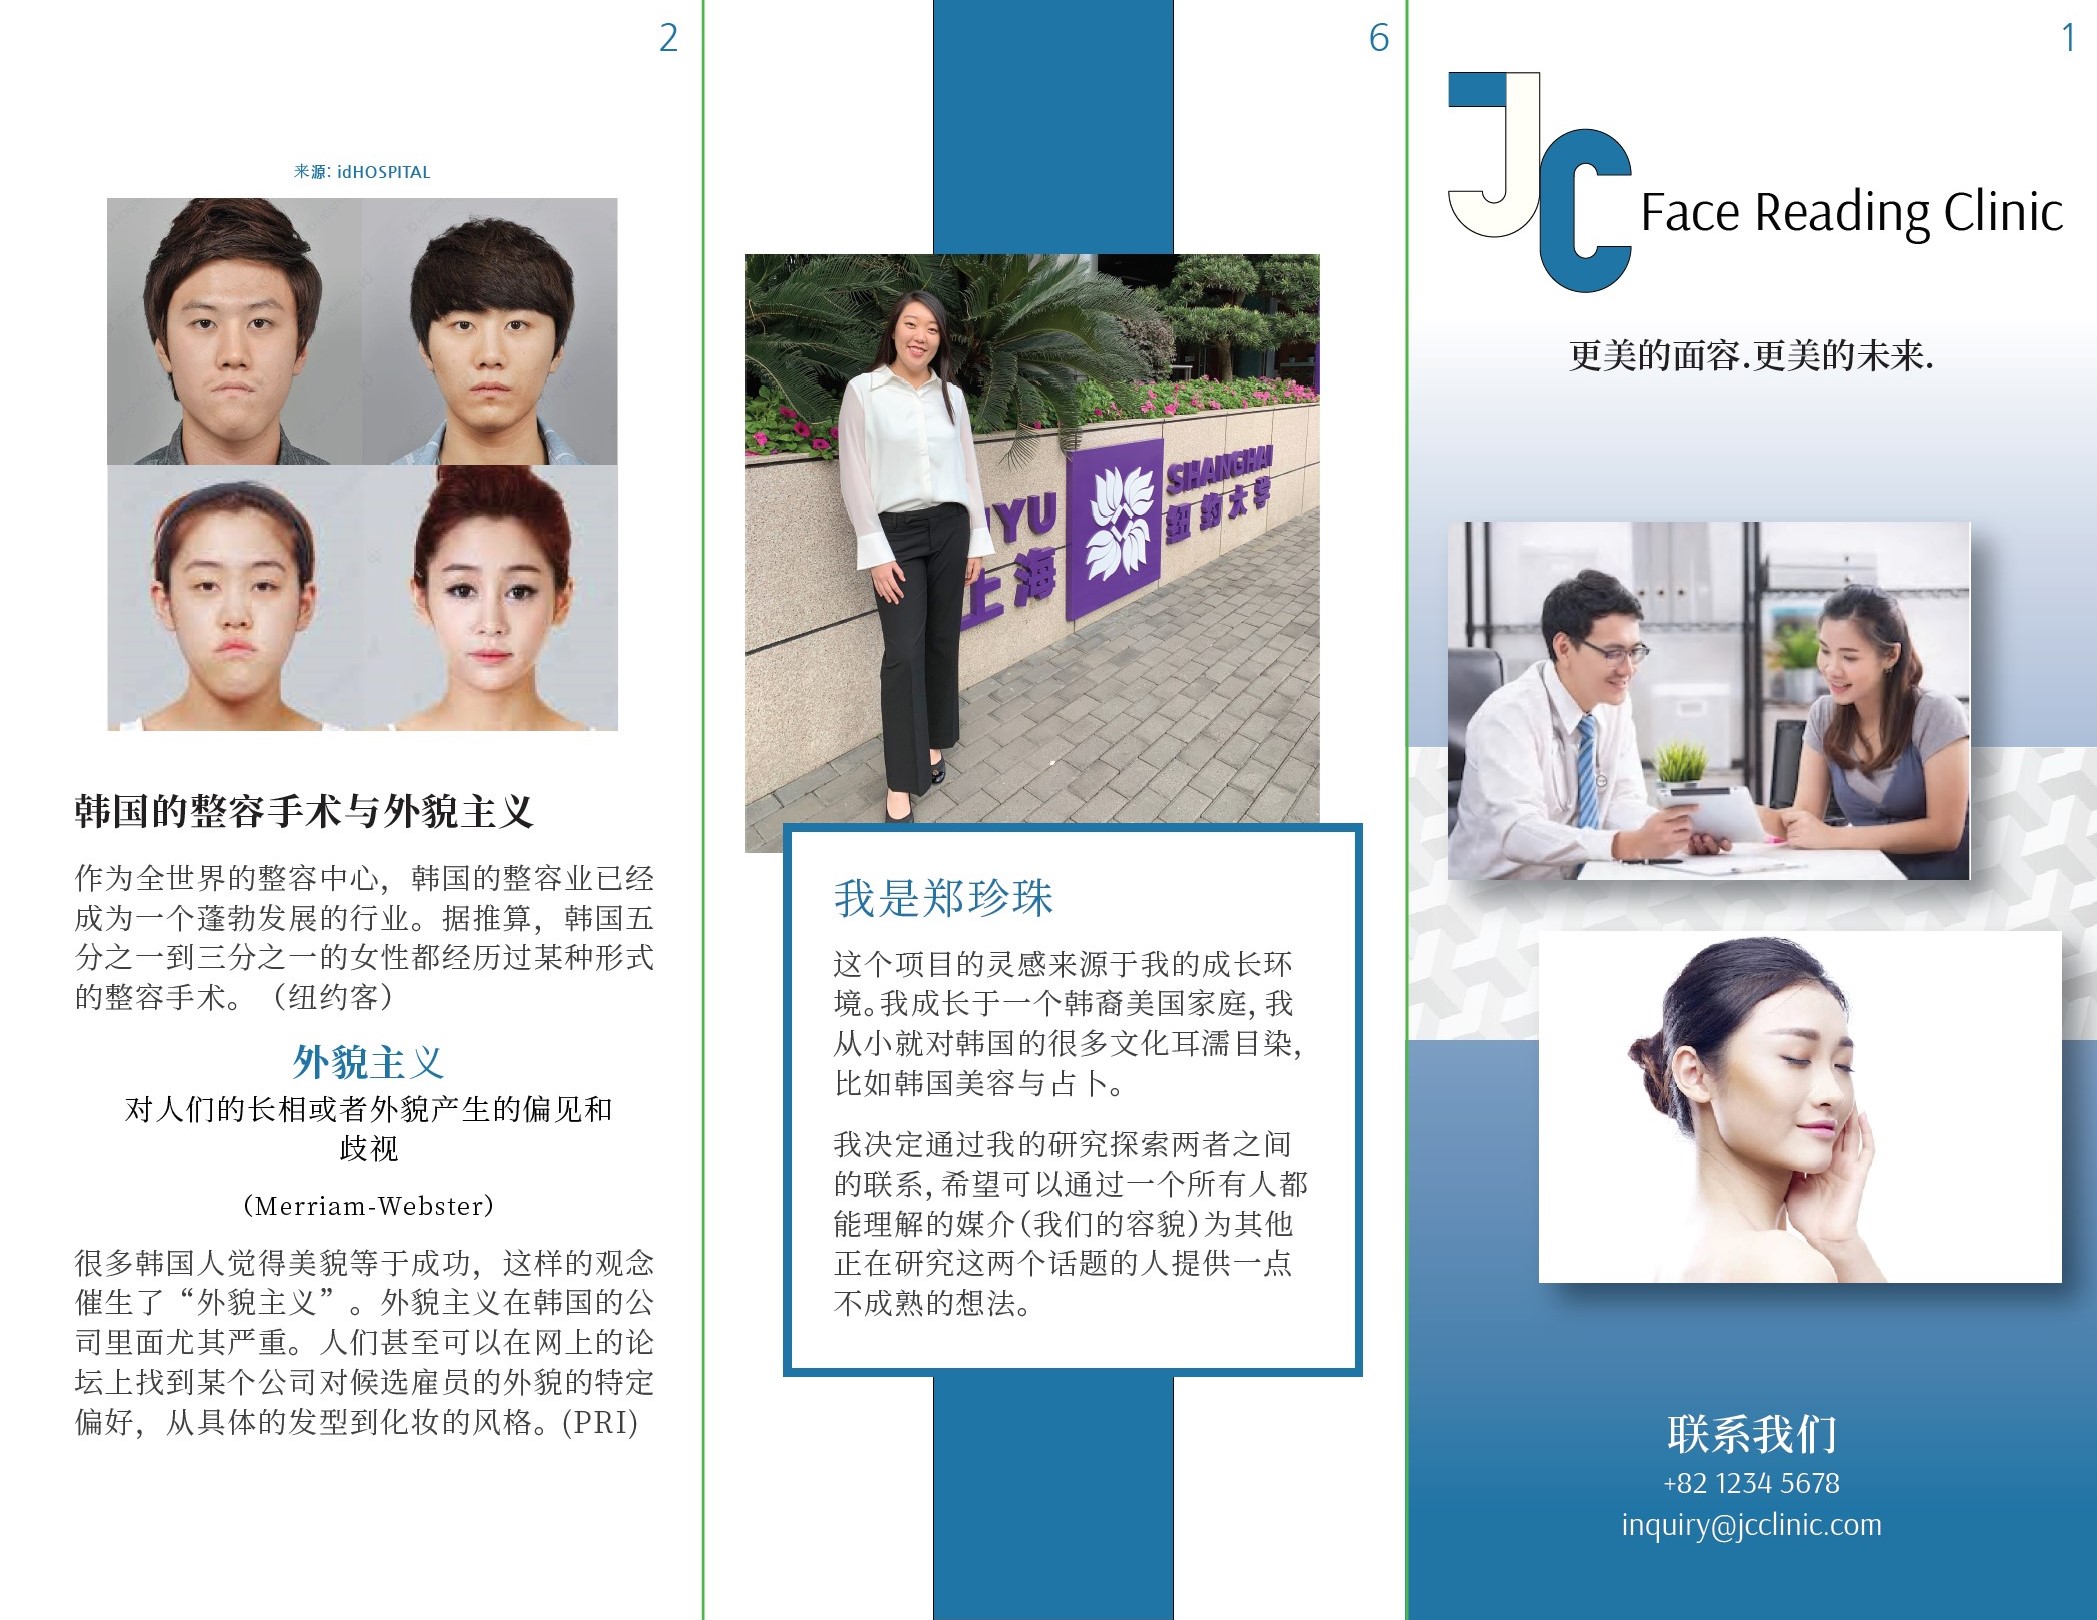 chin pamphlet 1